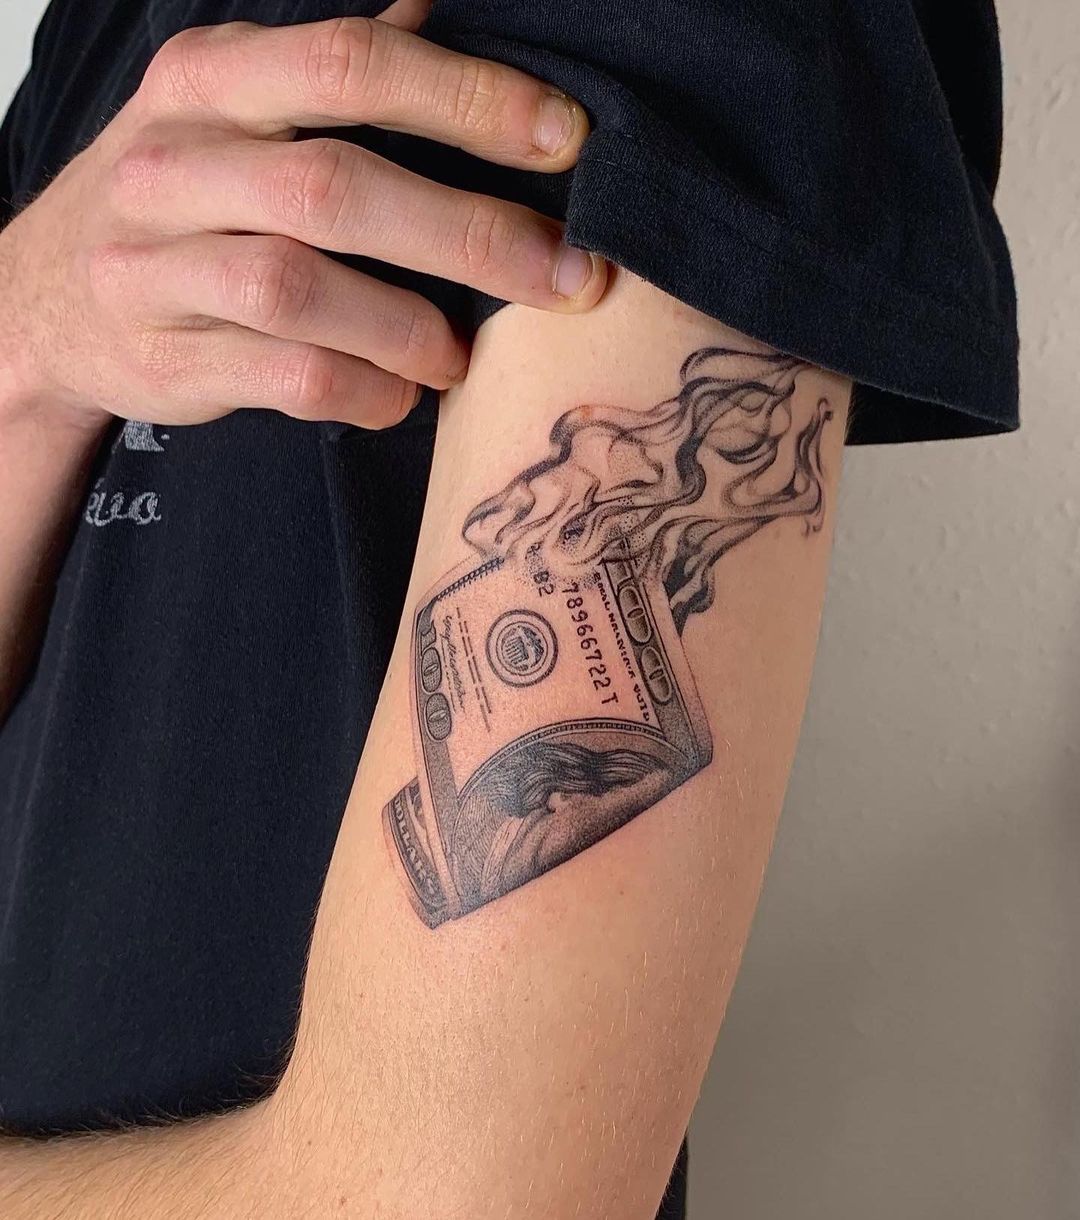 Reflect Your Style With These 10 Simple Tattoos for Men  The Dashing Man